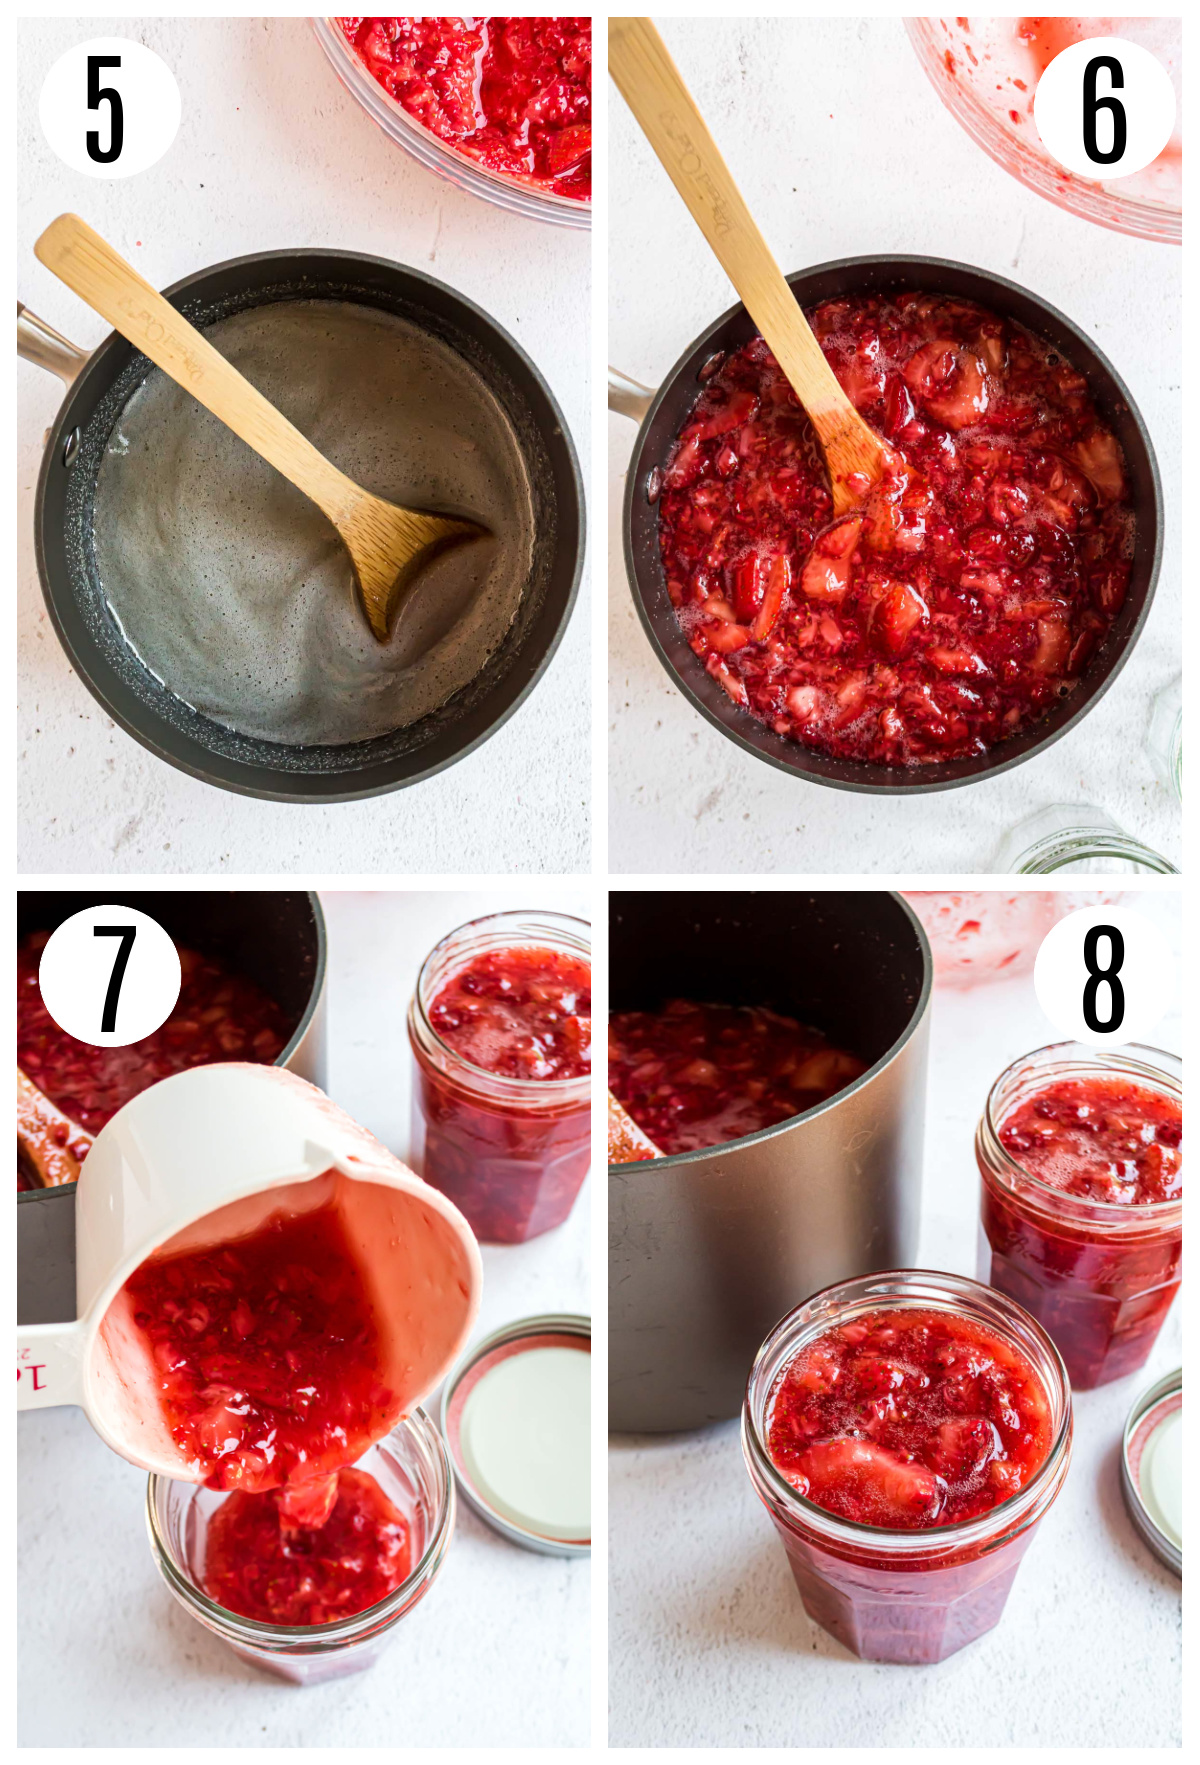 A photo collage of the next steps in making the freezer jam including boiling the pectin mixture, adding the crushed berries, and pouring the mixture into the jars.